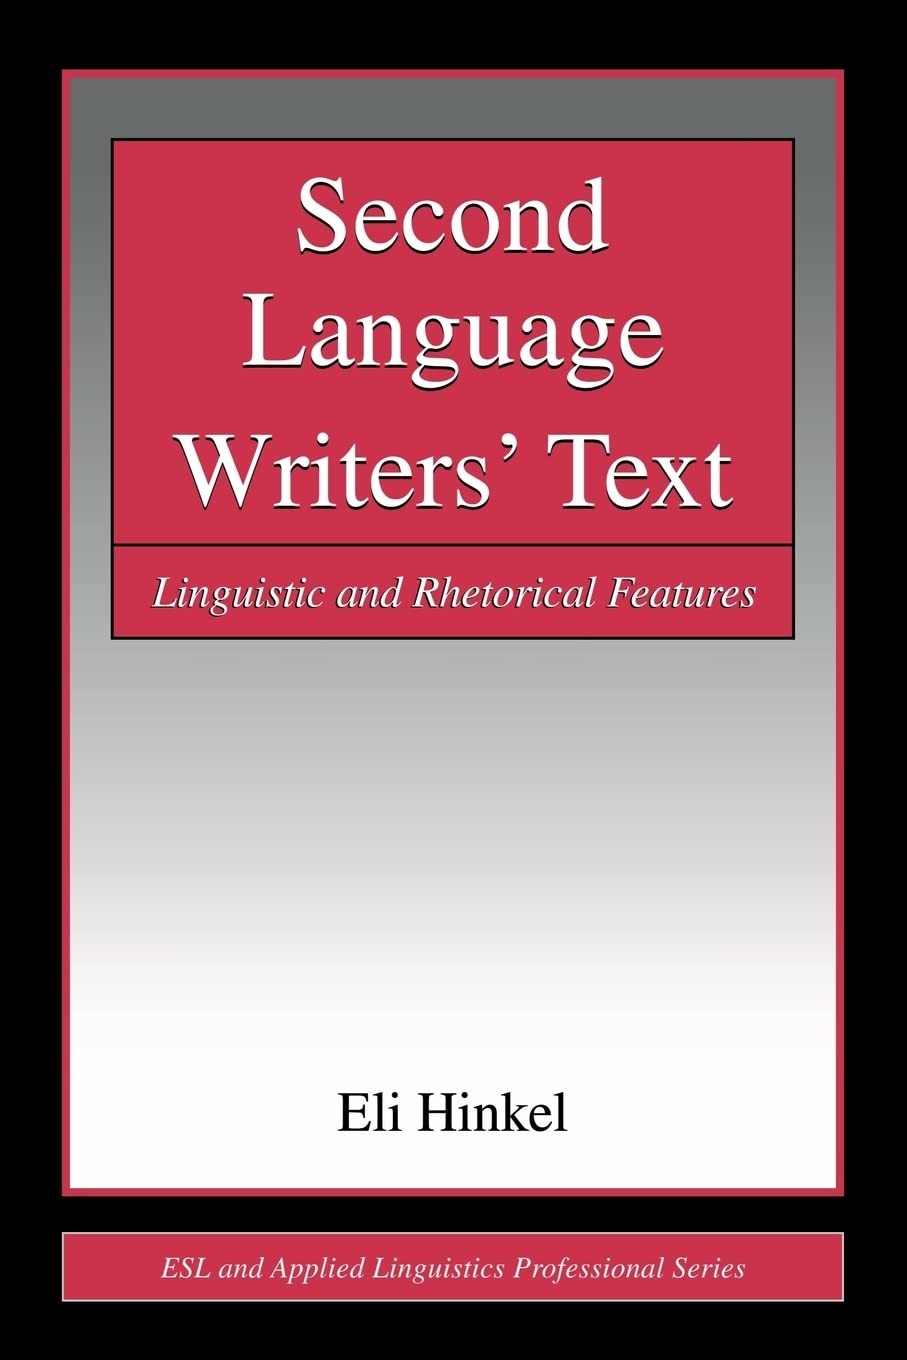 Second Language Writers' Text: Linguistic and Rhetorical Features